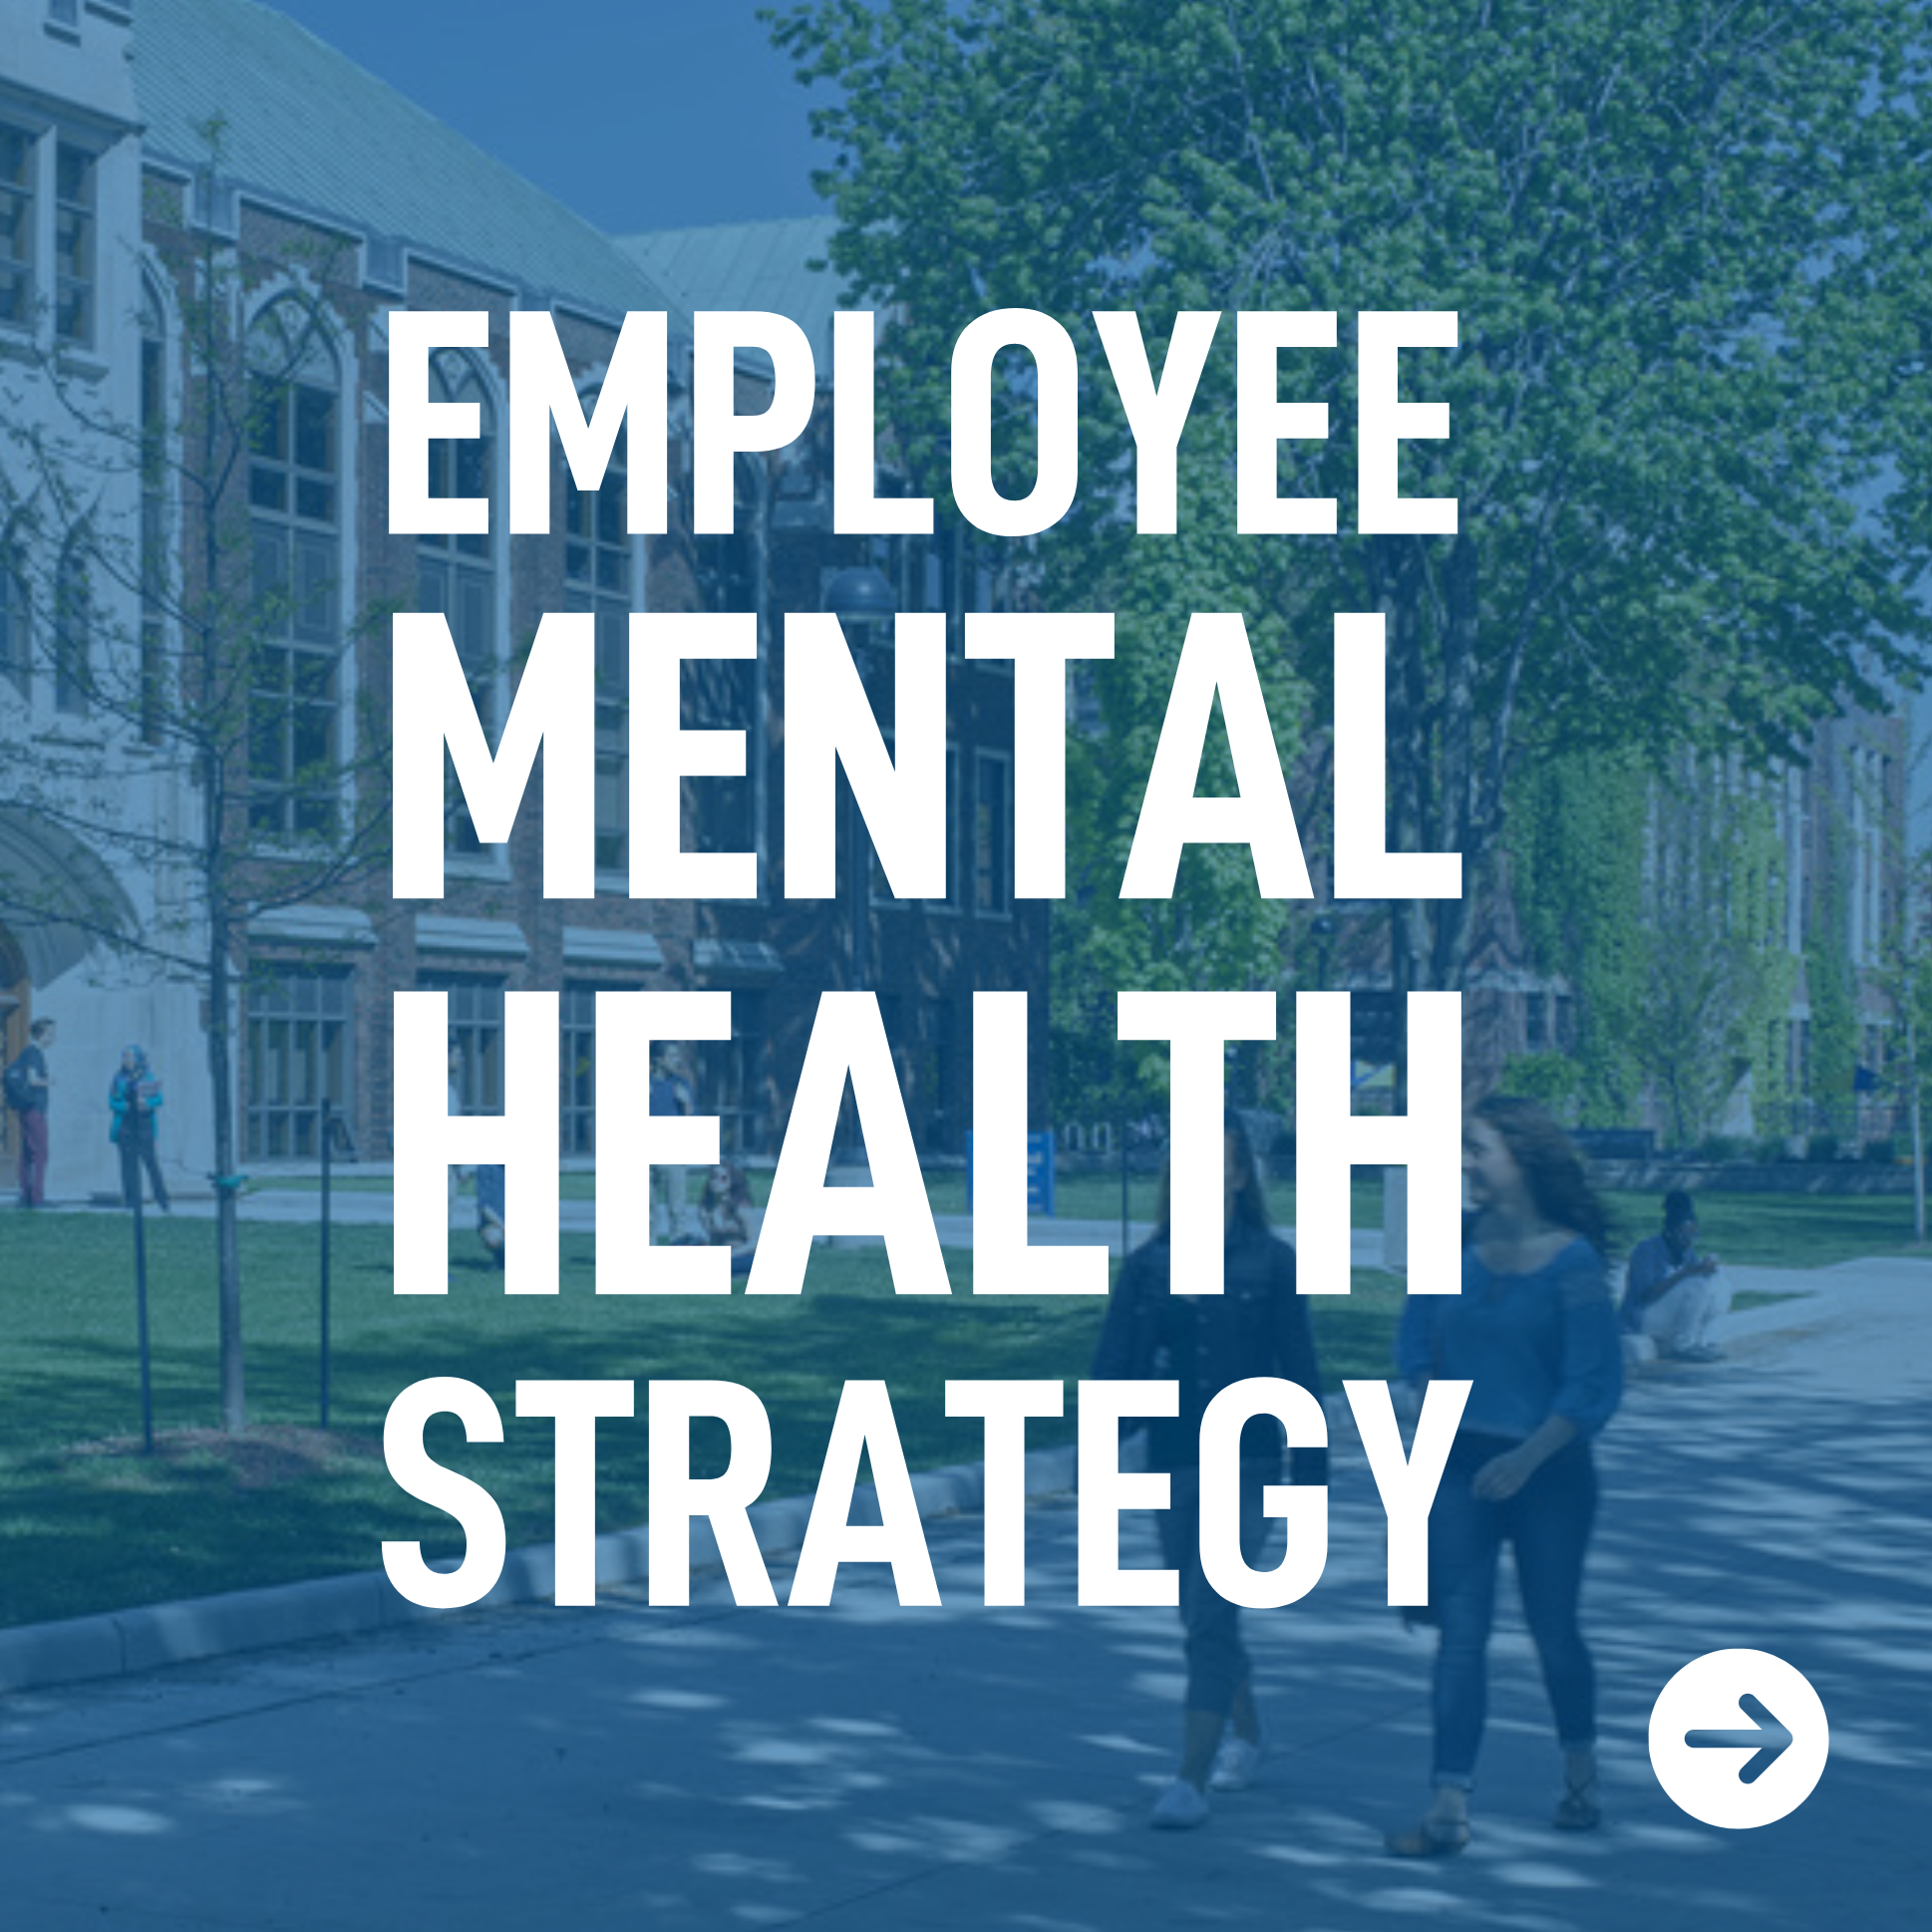 An image of Dillon Hall with the text "Employee Mental Health Strategy" written on top of the image.